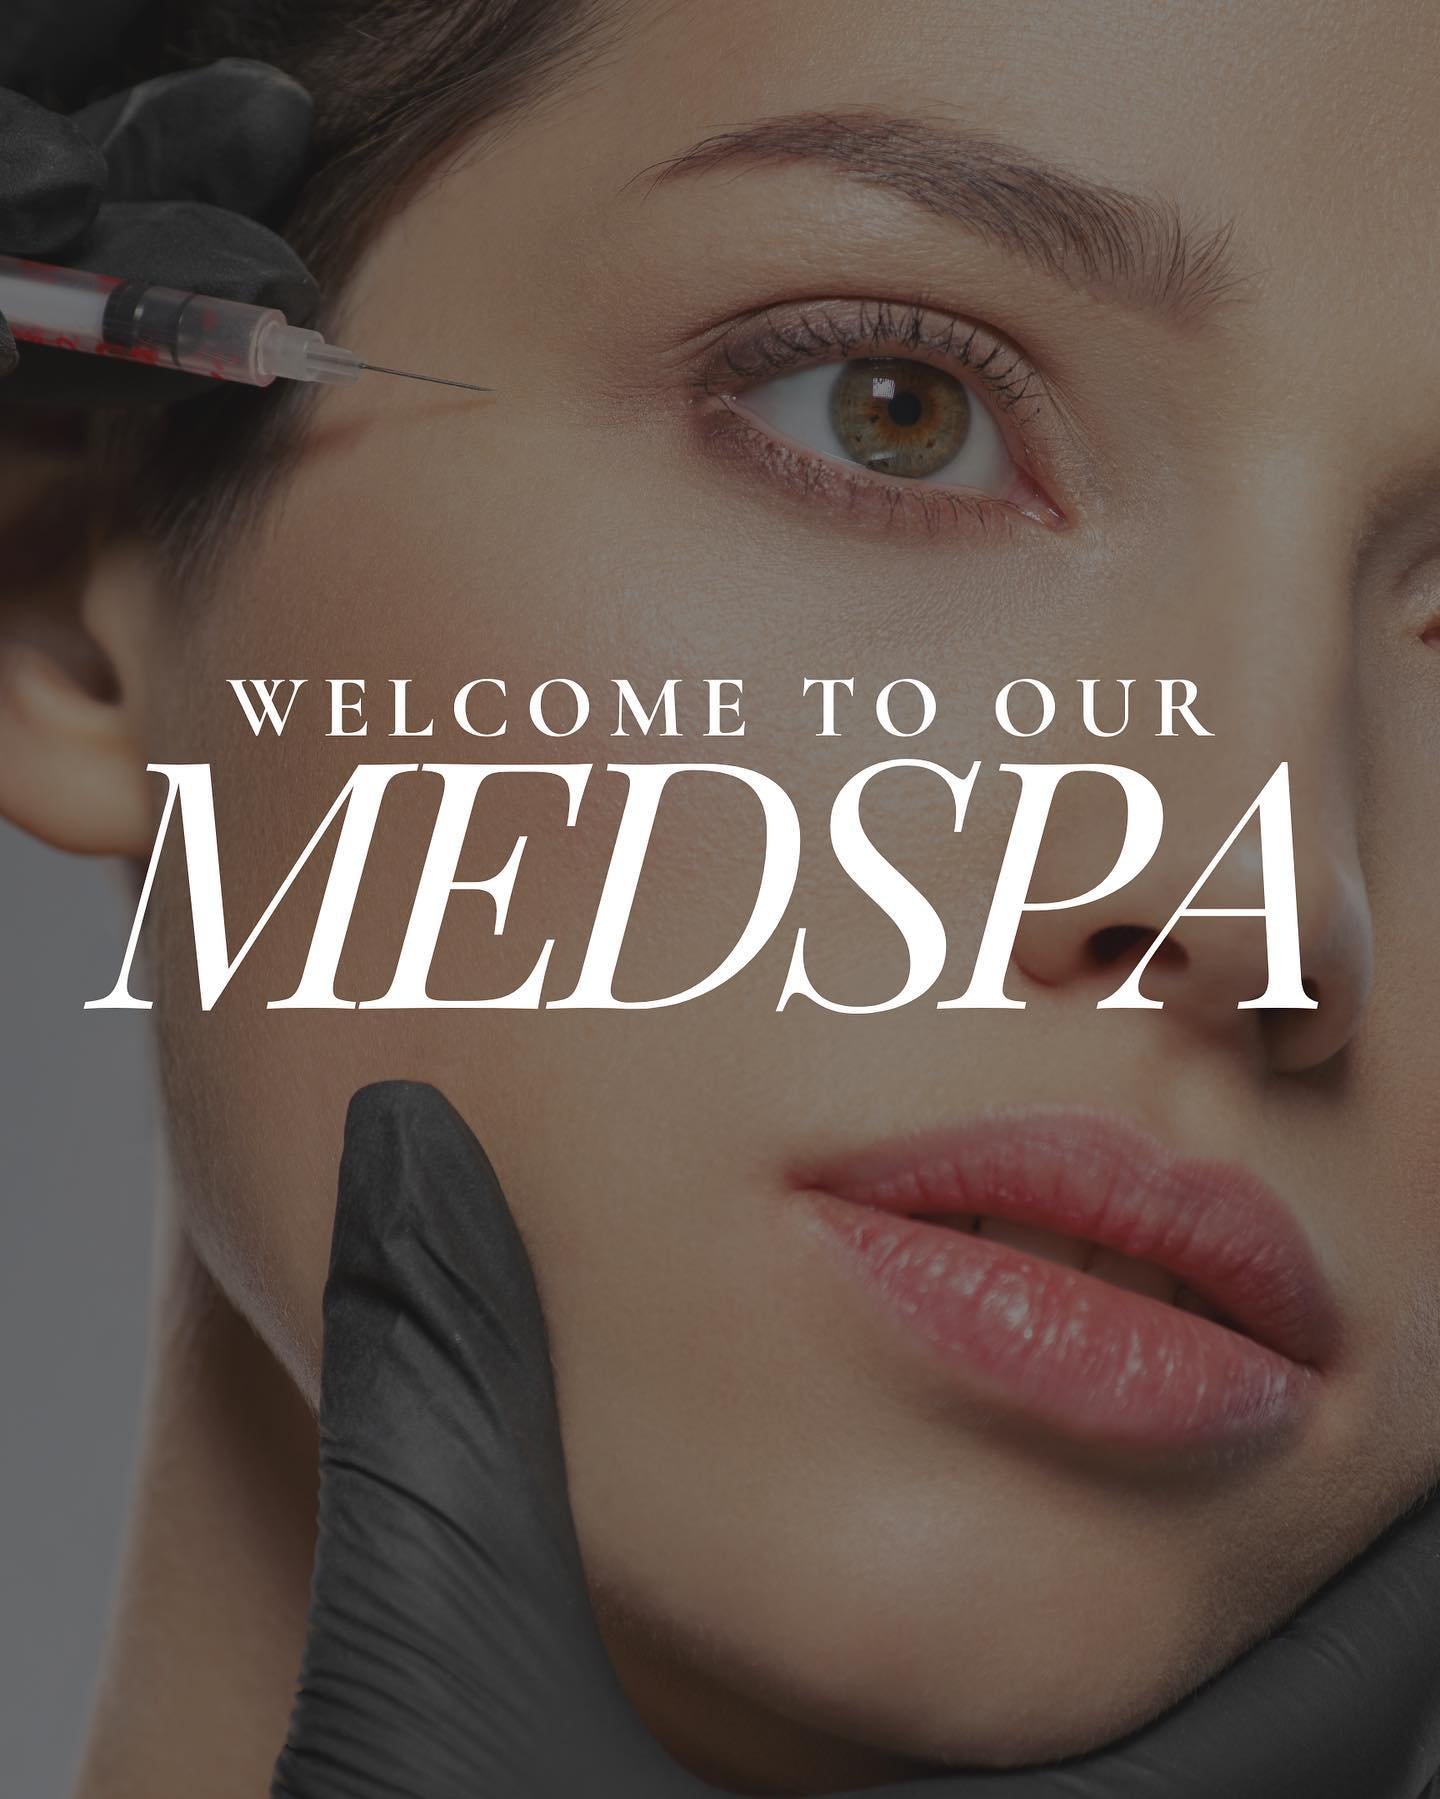 We&rsquo;re thrilled to announce the addition of our MEDSPA!
Along with our existing spa services, we will be offering Botox/dysport &amp; dermal filler to enhance your natural beauty! 
***SWIPE for opening special!***